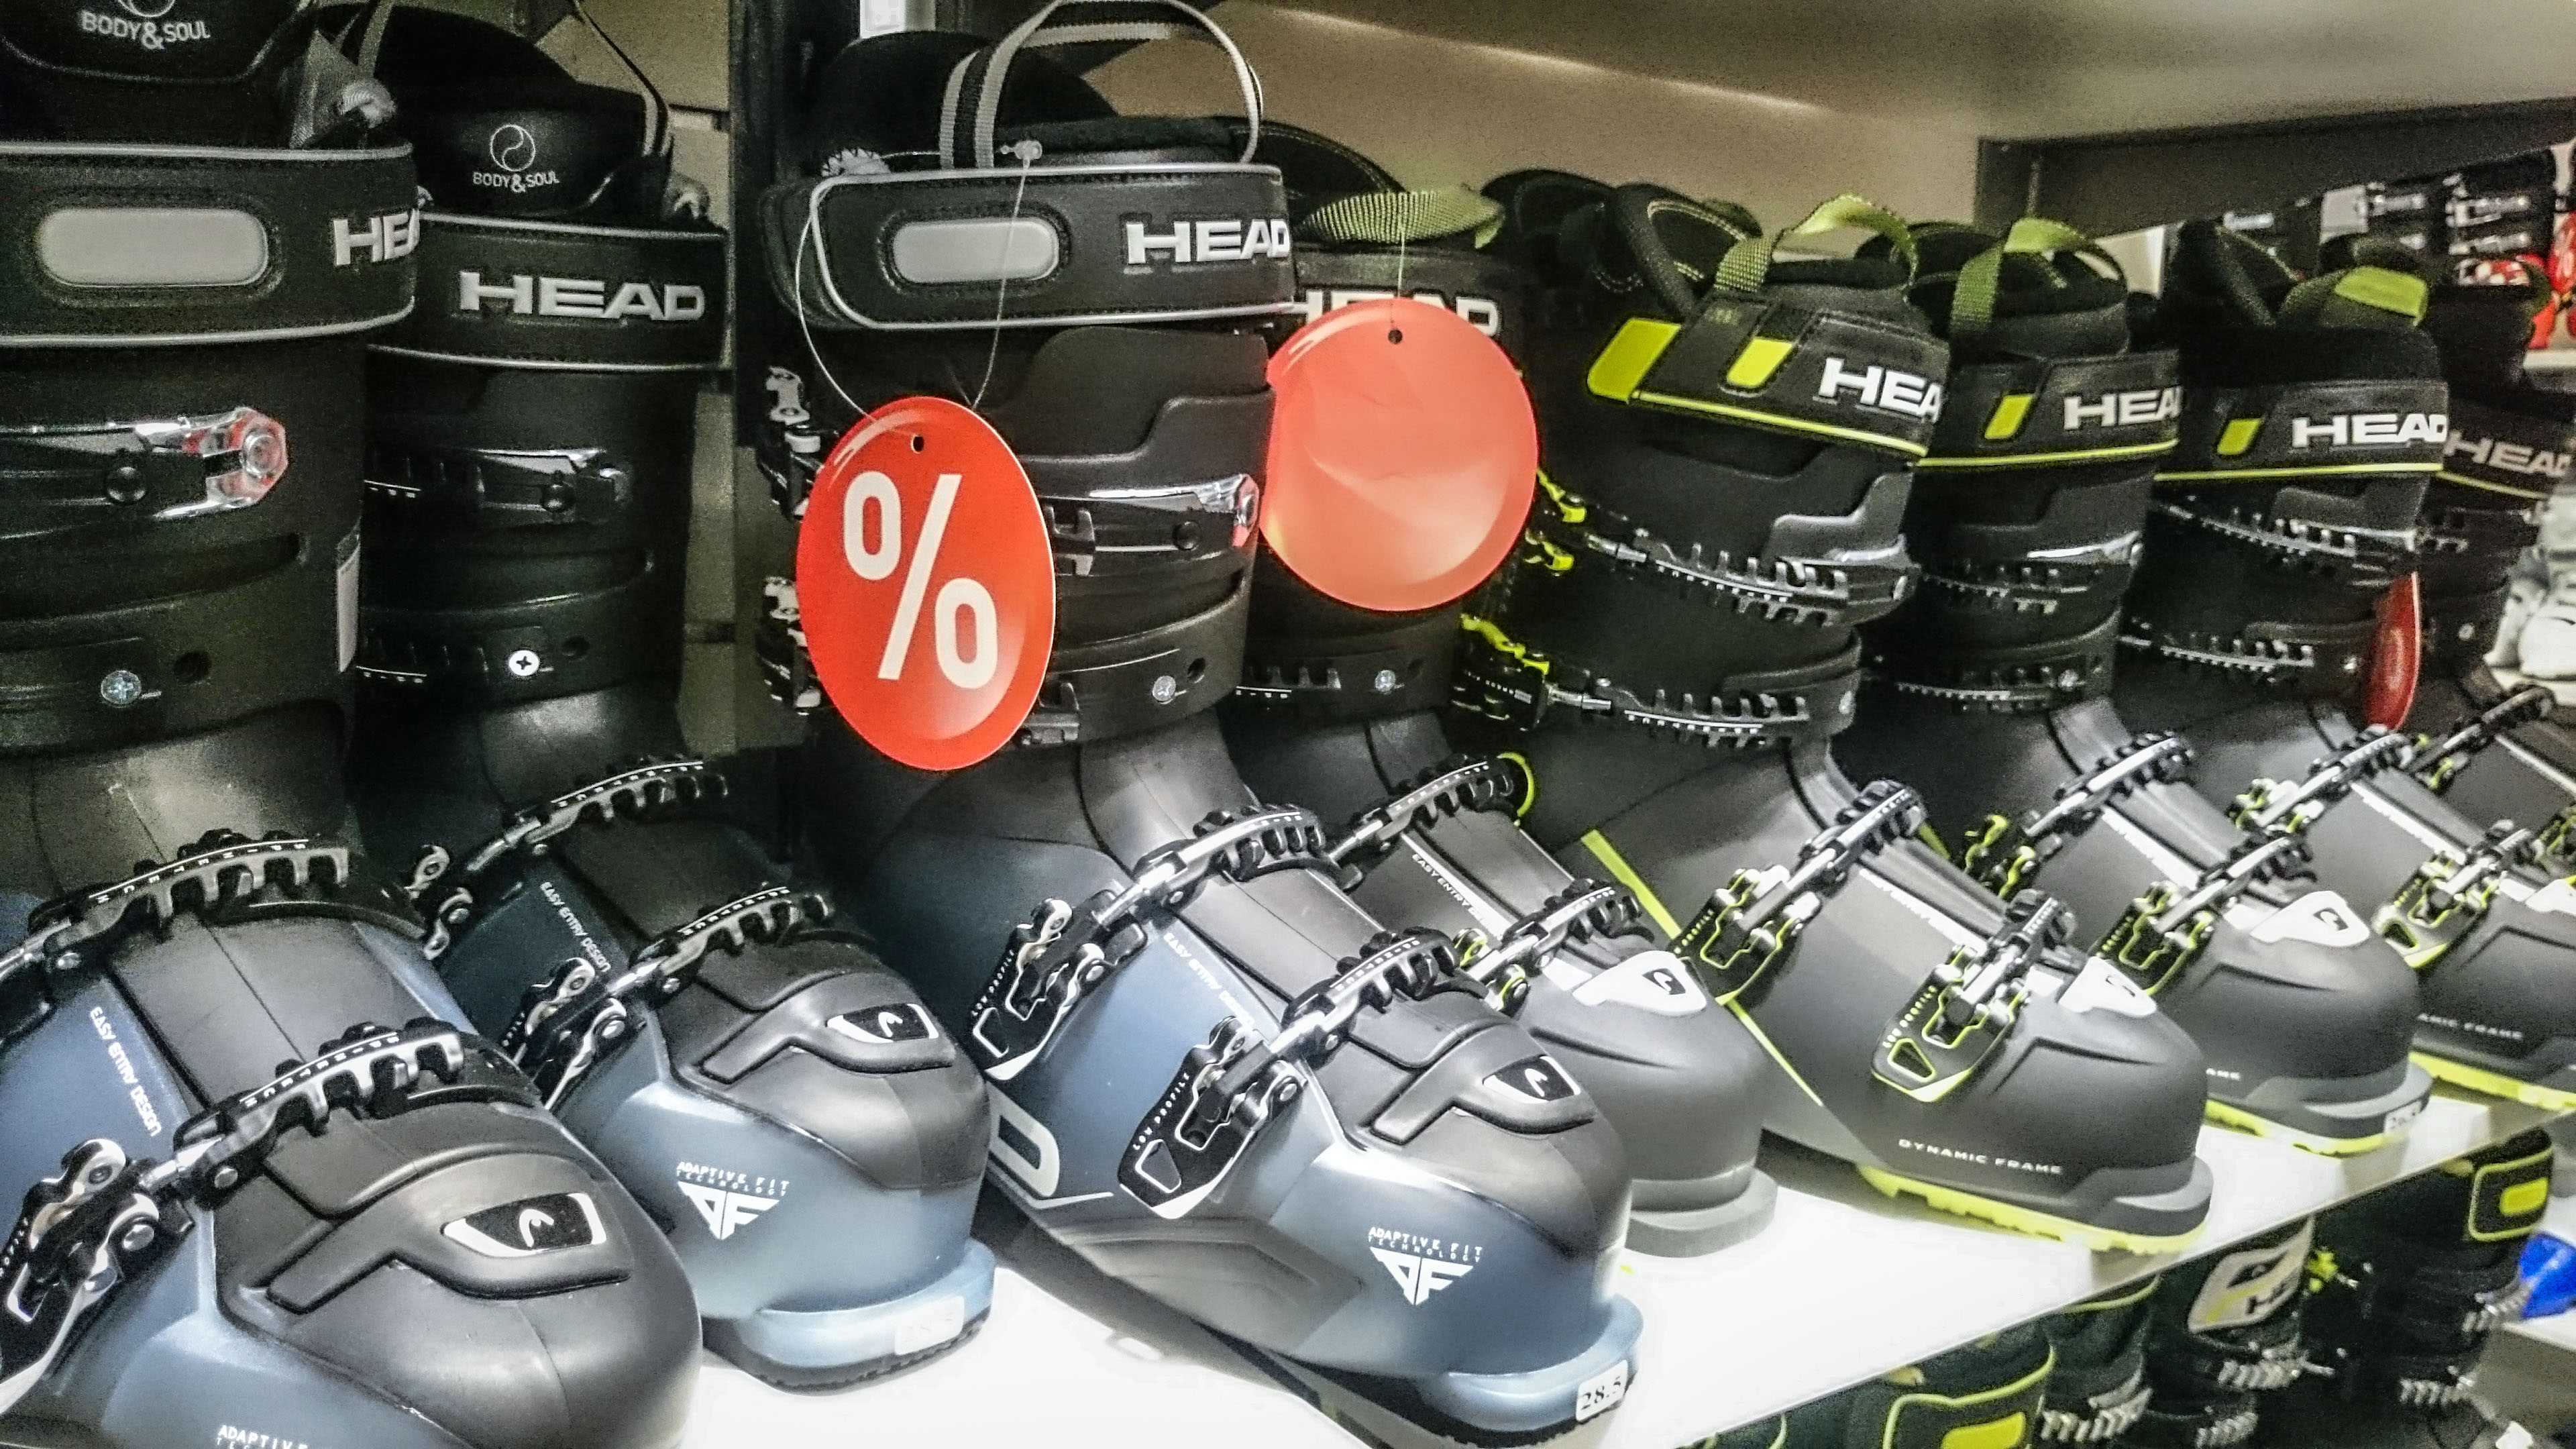 How to choose ski-boots